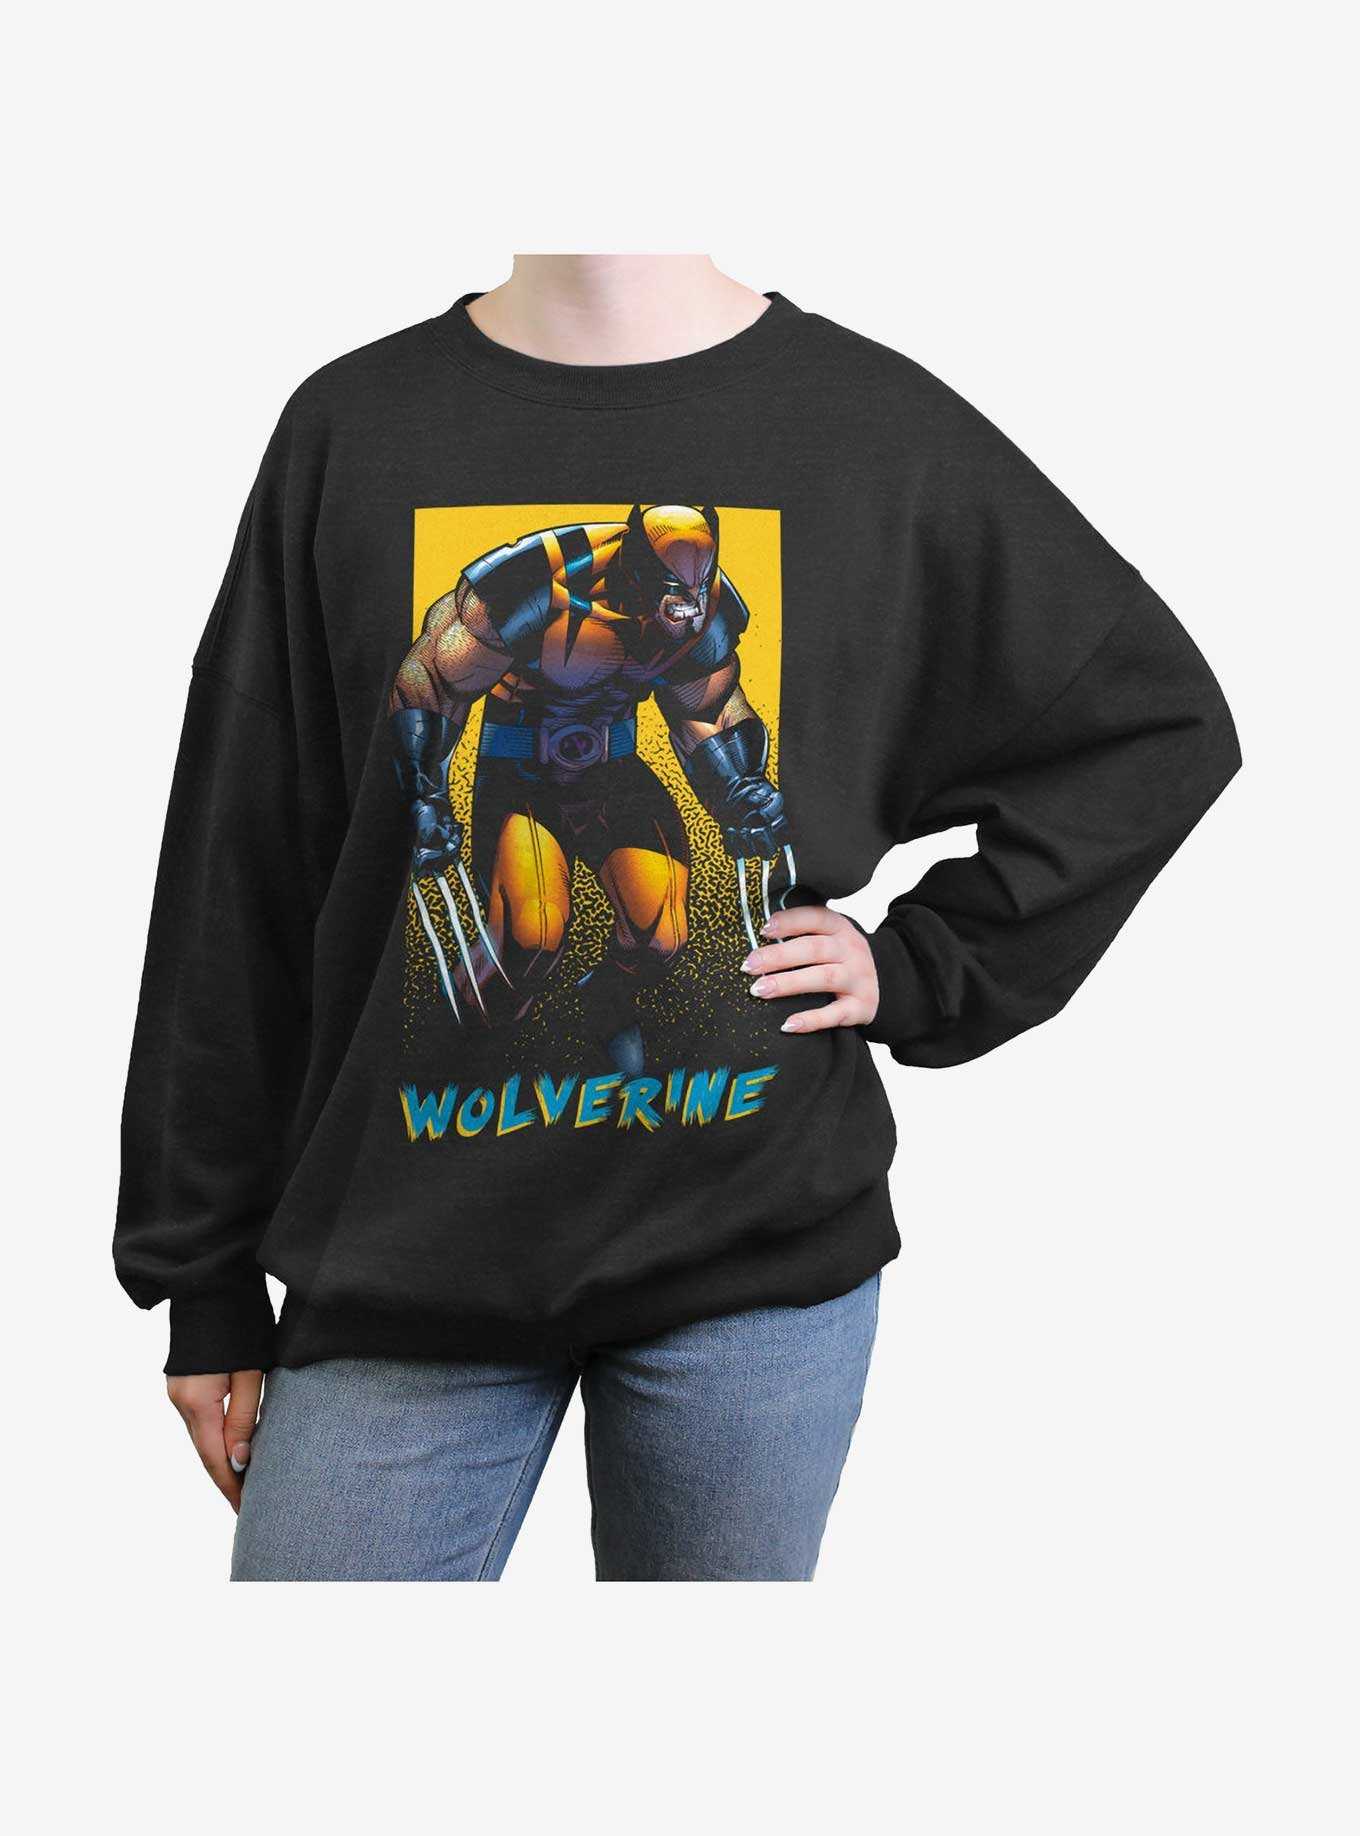 Wolverine Claws Out Poster Womens Oversized Sweatshirt, , hi-res